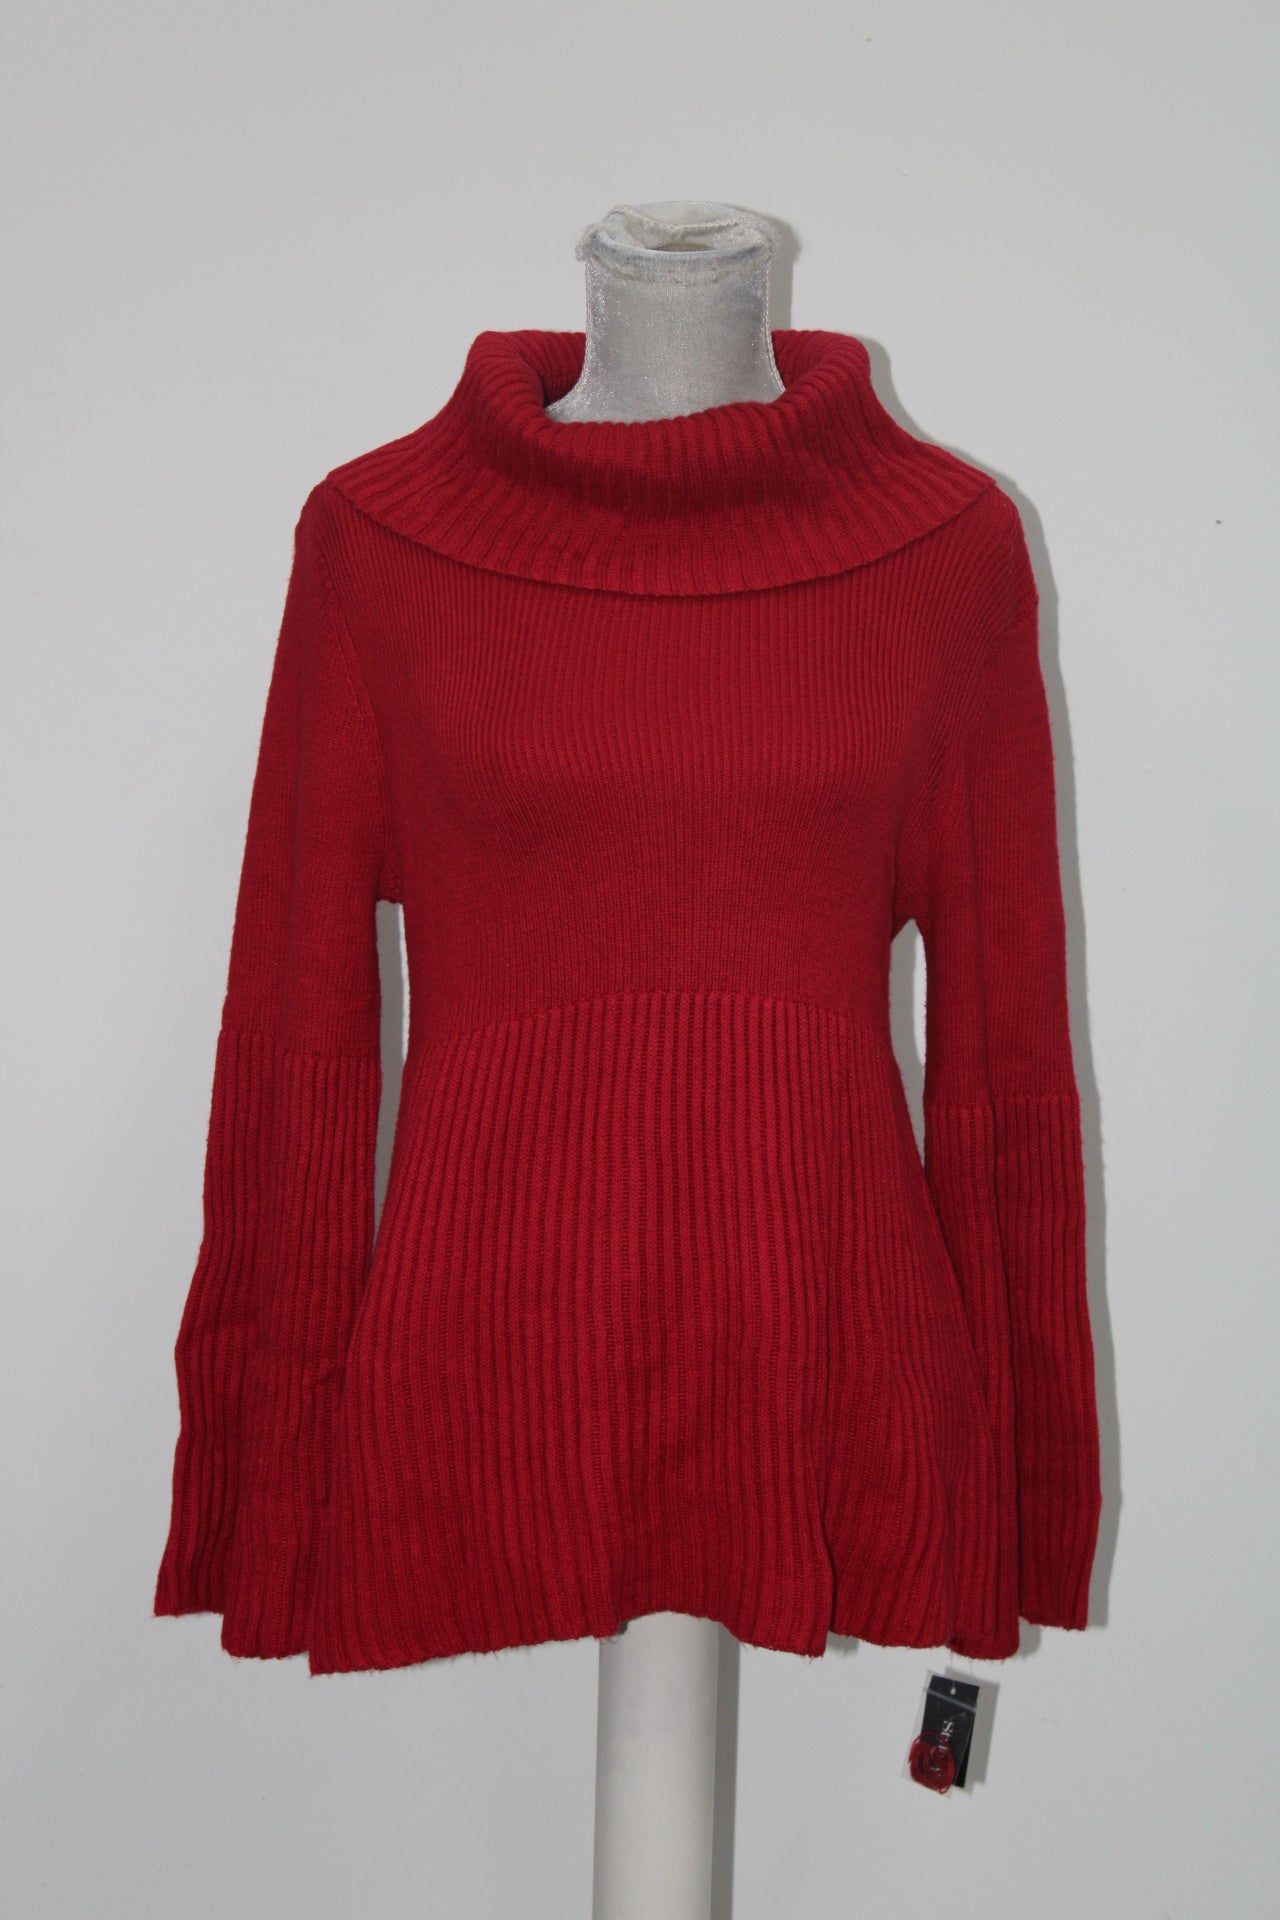 Style & Co. Womens Petites Turtleneck Ribbed Knit Pullover Sweater Red PL